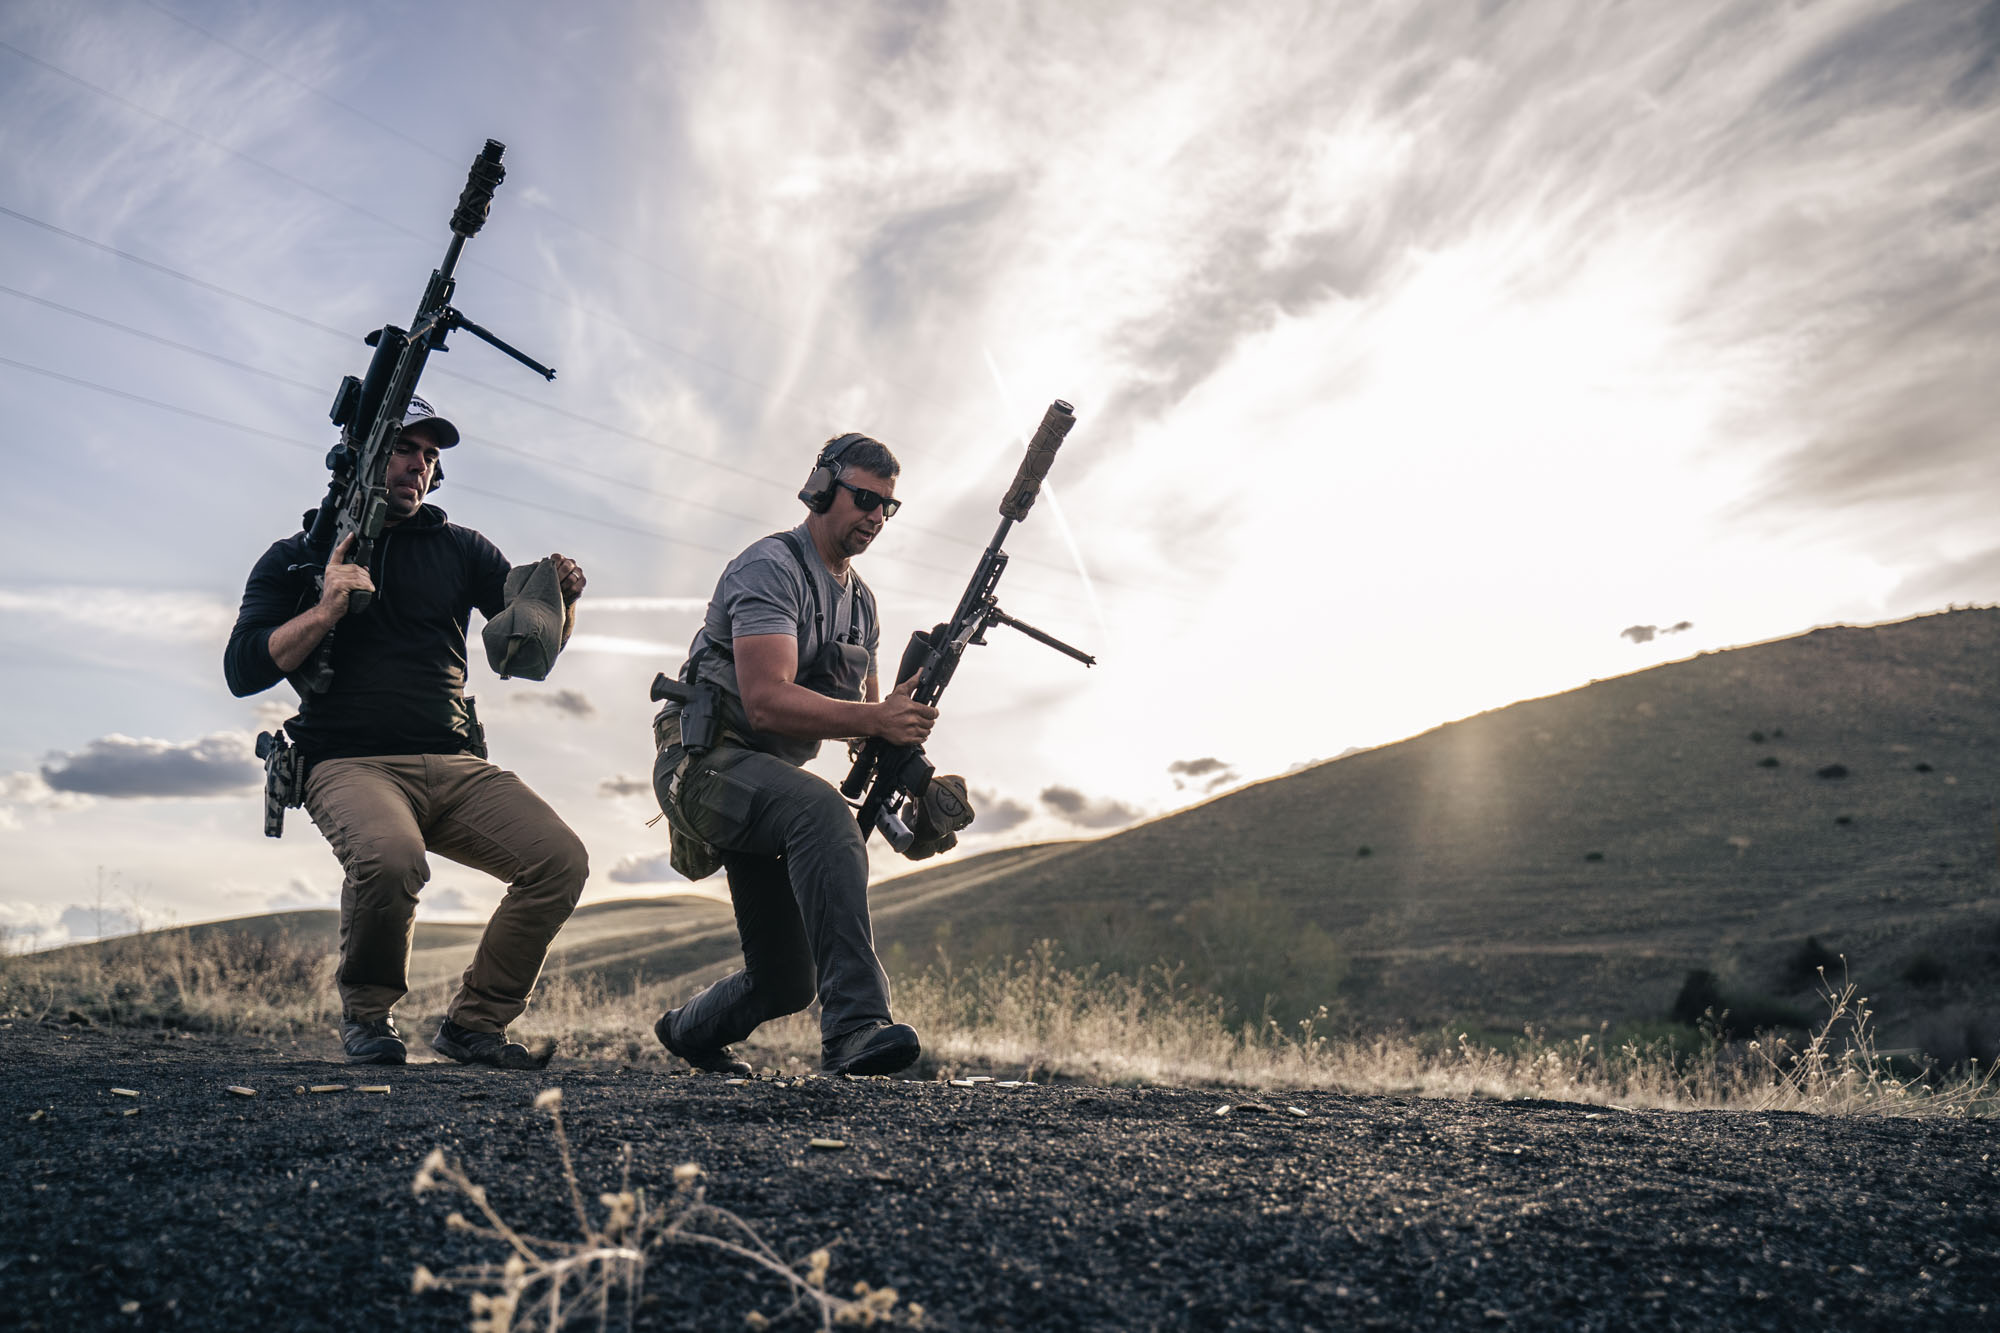 Learning from the World’s Greatest Two-Man Sniper Competition Team